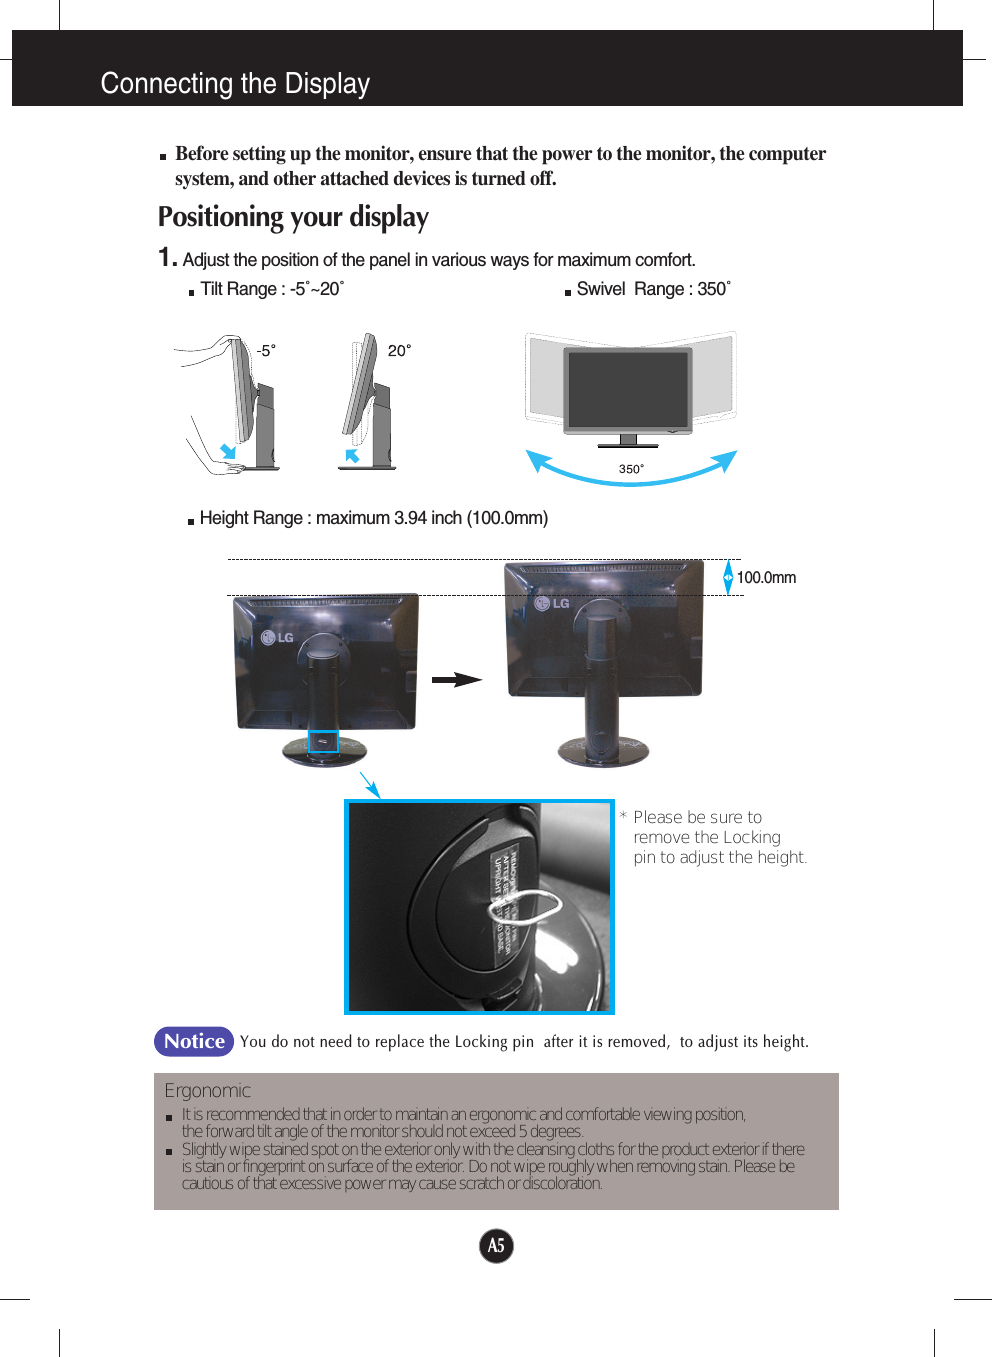 A5Connecting the DisplayBefore setting up the monitor, ensure that the power to the monitor, the computersystem, and other attached devices is turned off. Positioning your display1. Adjust the position of the panel in various ways for maximum comfort.Tilt Range : -5˚~20˚                                                  Swivel  Range : 350˚ErgonomicIt is recommended that in order to maintain an ergonomic and comfortable viewing position, the forward tilt angle of the monitor should not exceed 5 degrees.Slightly wipe stained spot on the exterior only with the cleansing cloths for the product exterior if there is stain or fingerprint on surface of the exterior. Do not wipe roughly when removing stain. Please be cautious of that excessive power may cause scratch or discoloration. Height Range : maximum 3.94 inch (100.0mm)* Please be sure to       remove the Locking pin to adjust the height.   You do not need to replace the Locking pin  after it is removed,  to adjust its height. Notice100.0mm